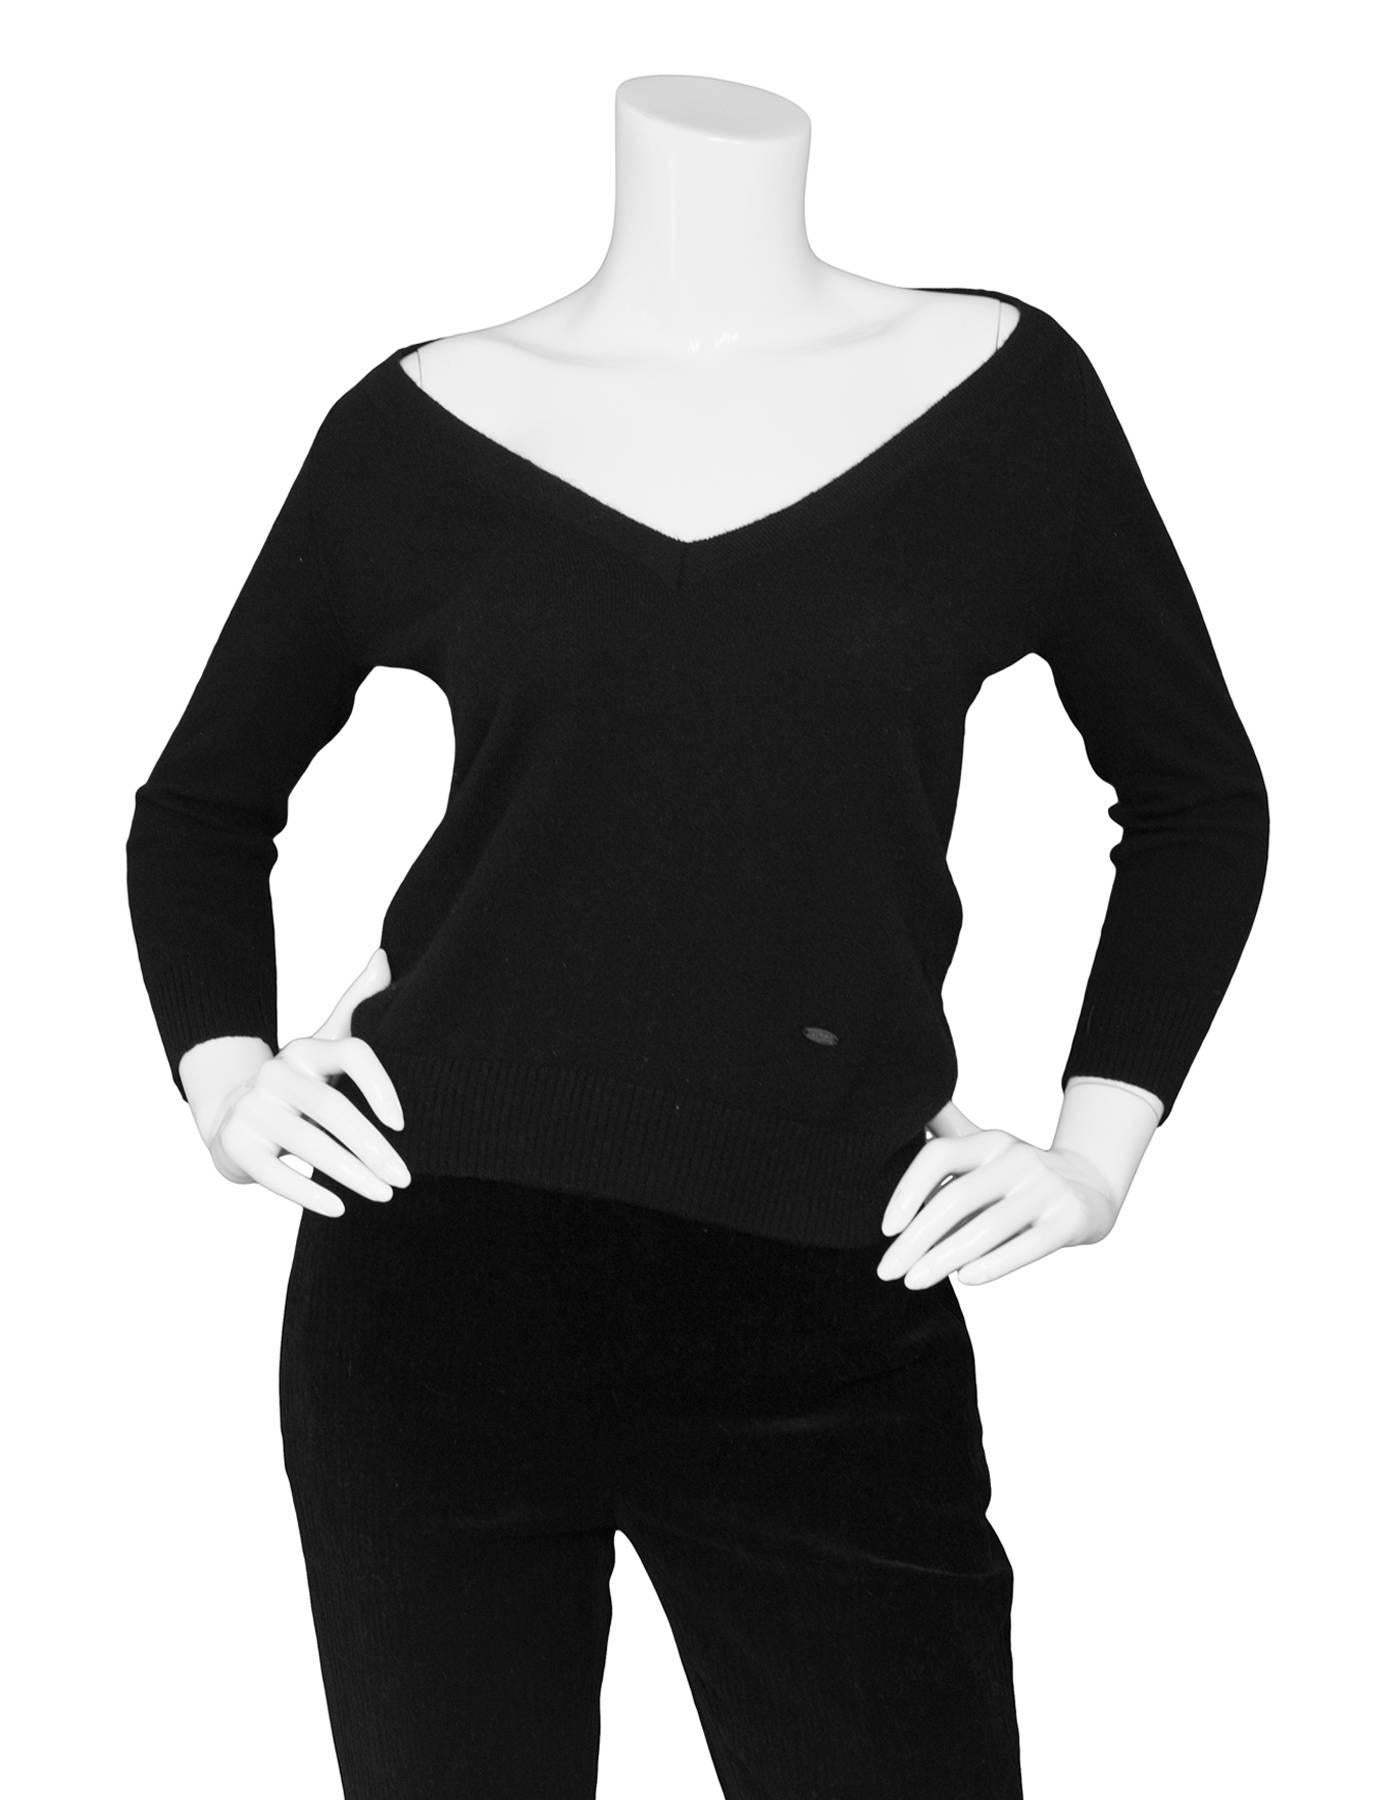 Emilio Pucci Black Cashmere V-Neck Sweater Sz 8

Made In: Italy
Color: Black
Composition: 100% cashmere
Lining: None
Closure/Opening: Pull pver
Overall Condition: Very good pre-owned condition, minor fading and light pilling
Marked Size: US8 
Bust: